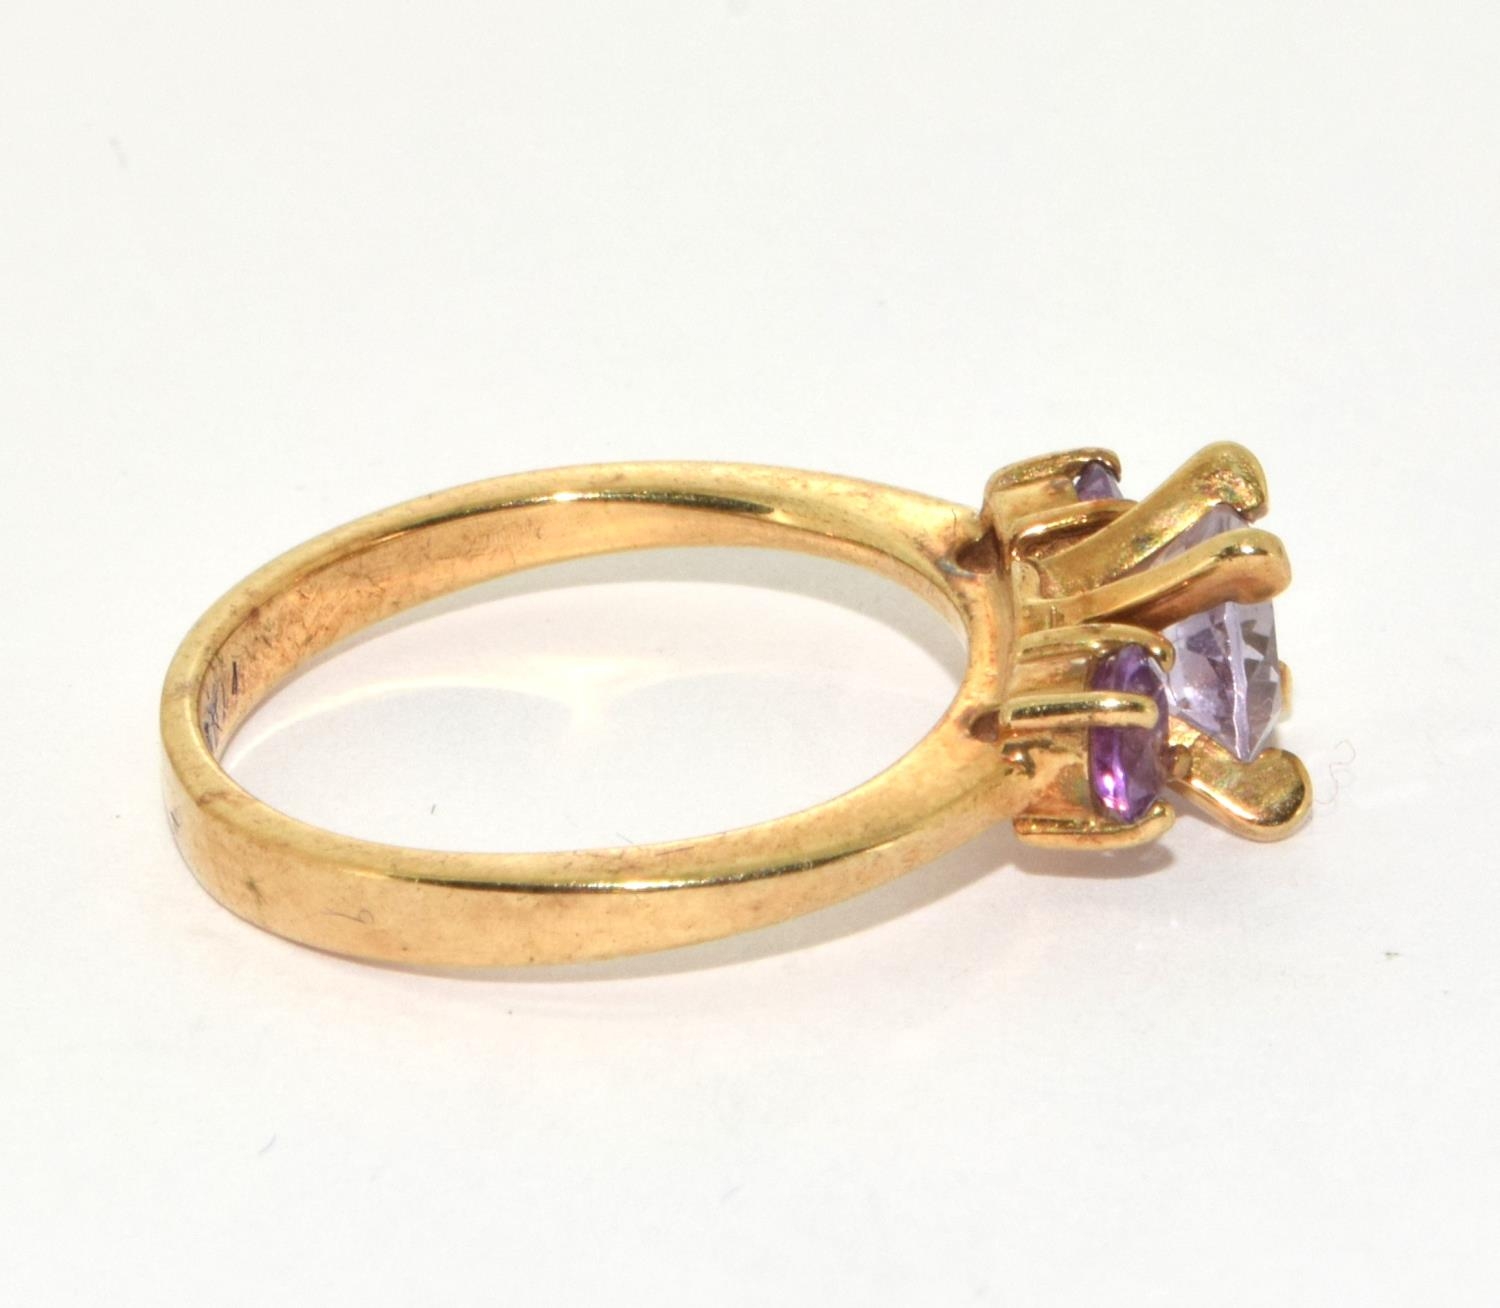 9ct gold ladies 3 stone Amethyst and tanzanite ring size N - Image 4 of 5